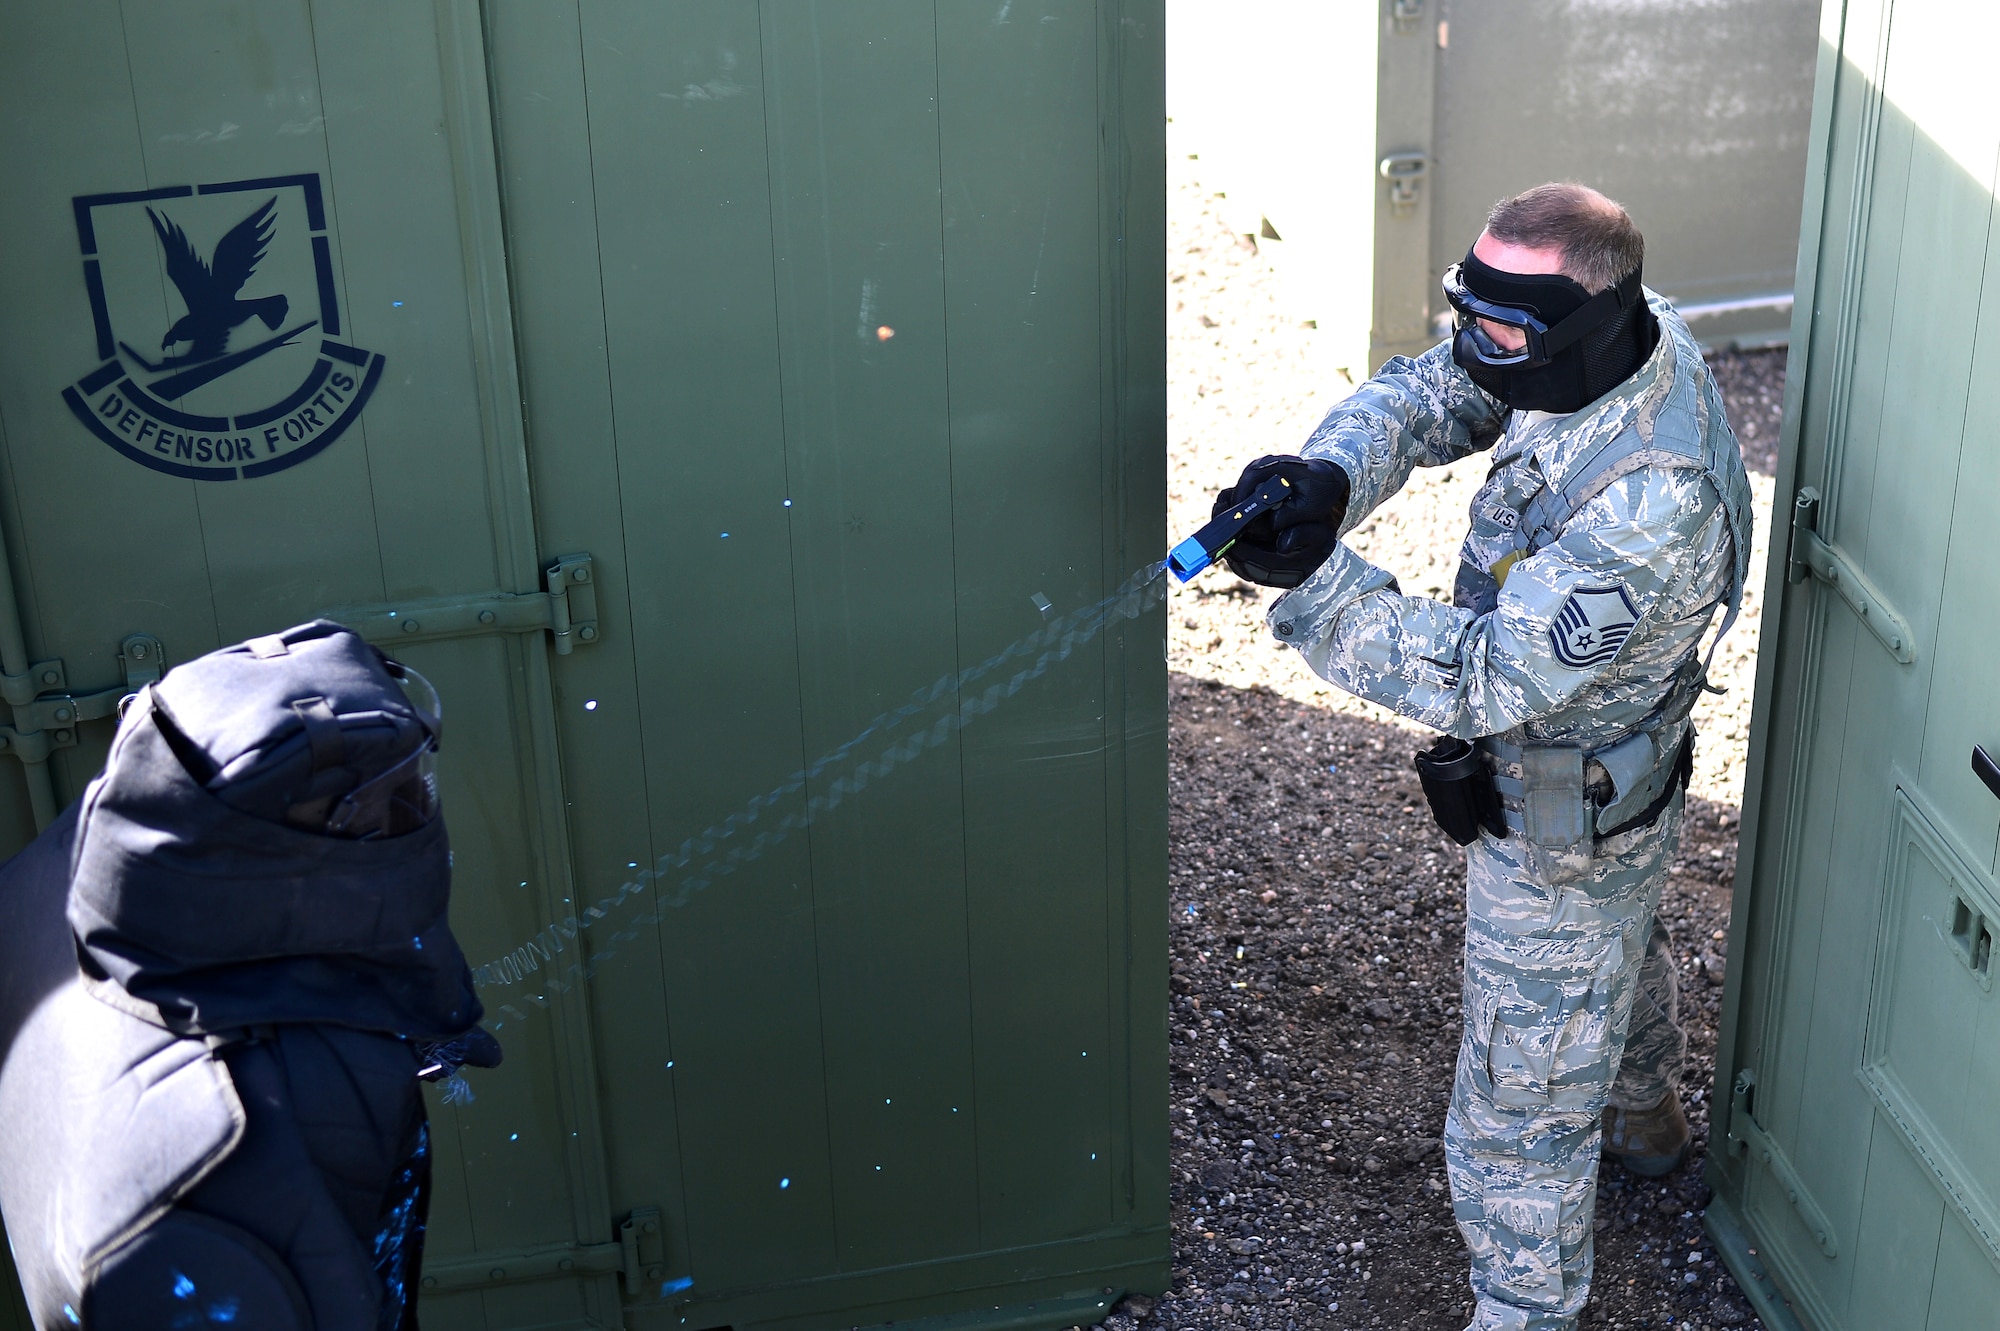 Master Sgt. Don Werkmeister, 140th Security Forces Squadron operations flight sergeant, simulates using a Conducted Electronic Weapon on a suspect during training Oct. 23, 2014, at the 140th SFS building on Buckley Air Force Base, Colo. CEW training is designed to educate law enforcement members on when and how to use non-lethal force in stressful situations. (U.S. Air Force photo by Senior Airman Darren Scott/Released)